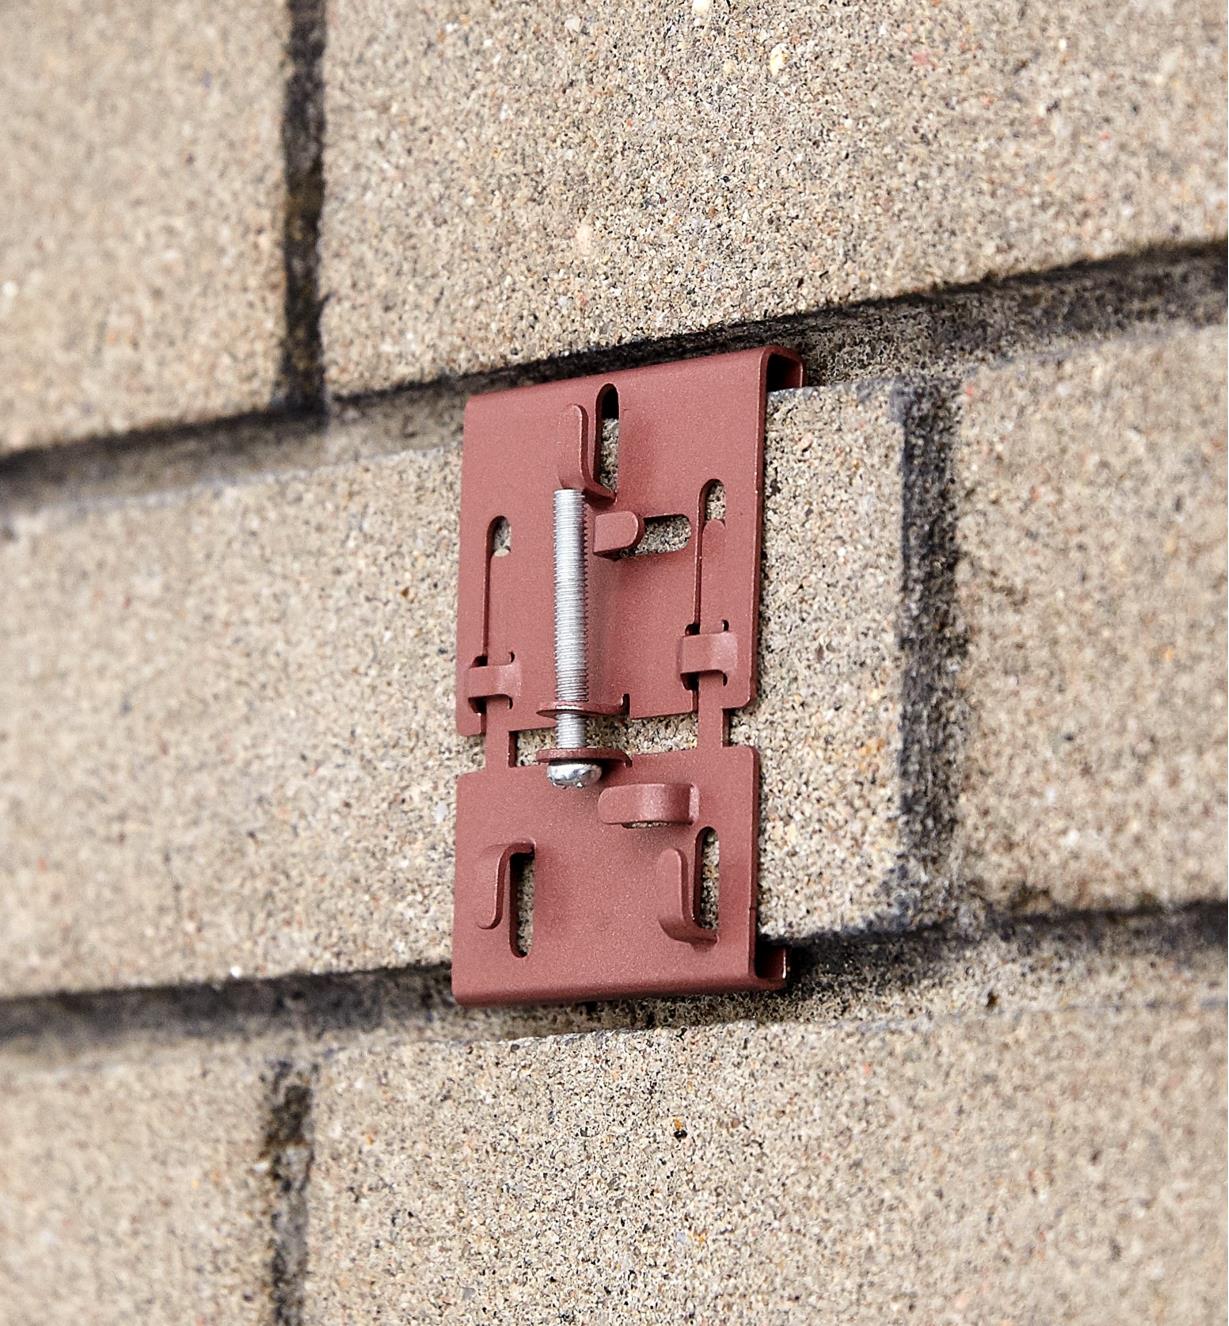 Brick clamp attached to brickwork that has recessed mortar